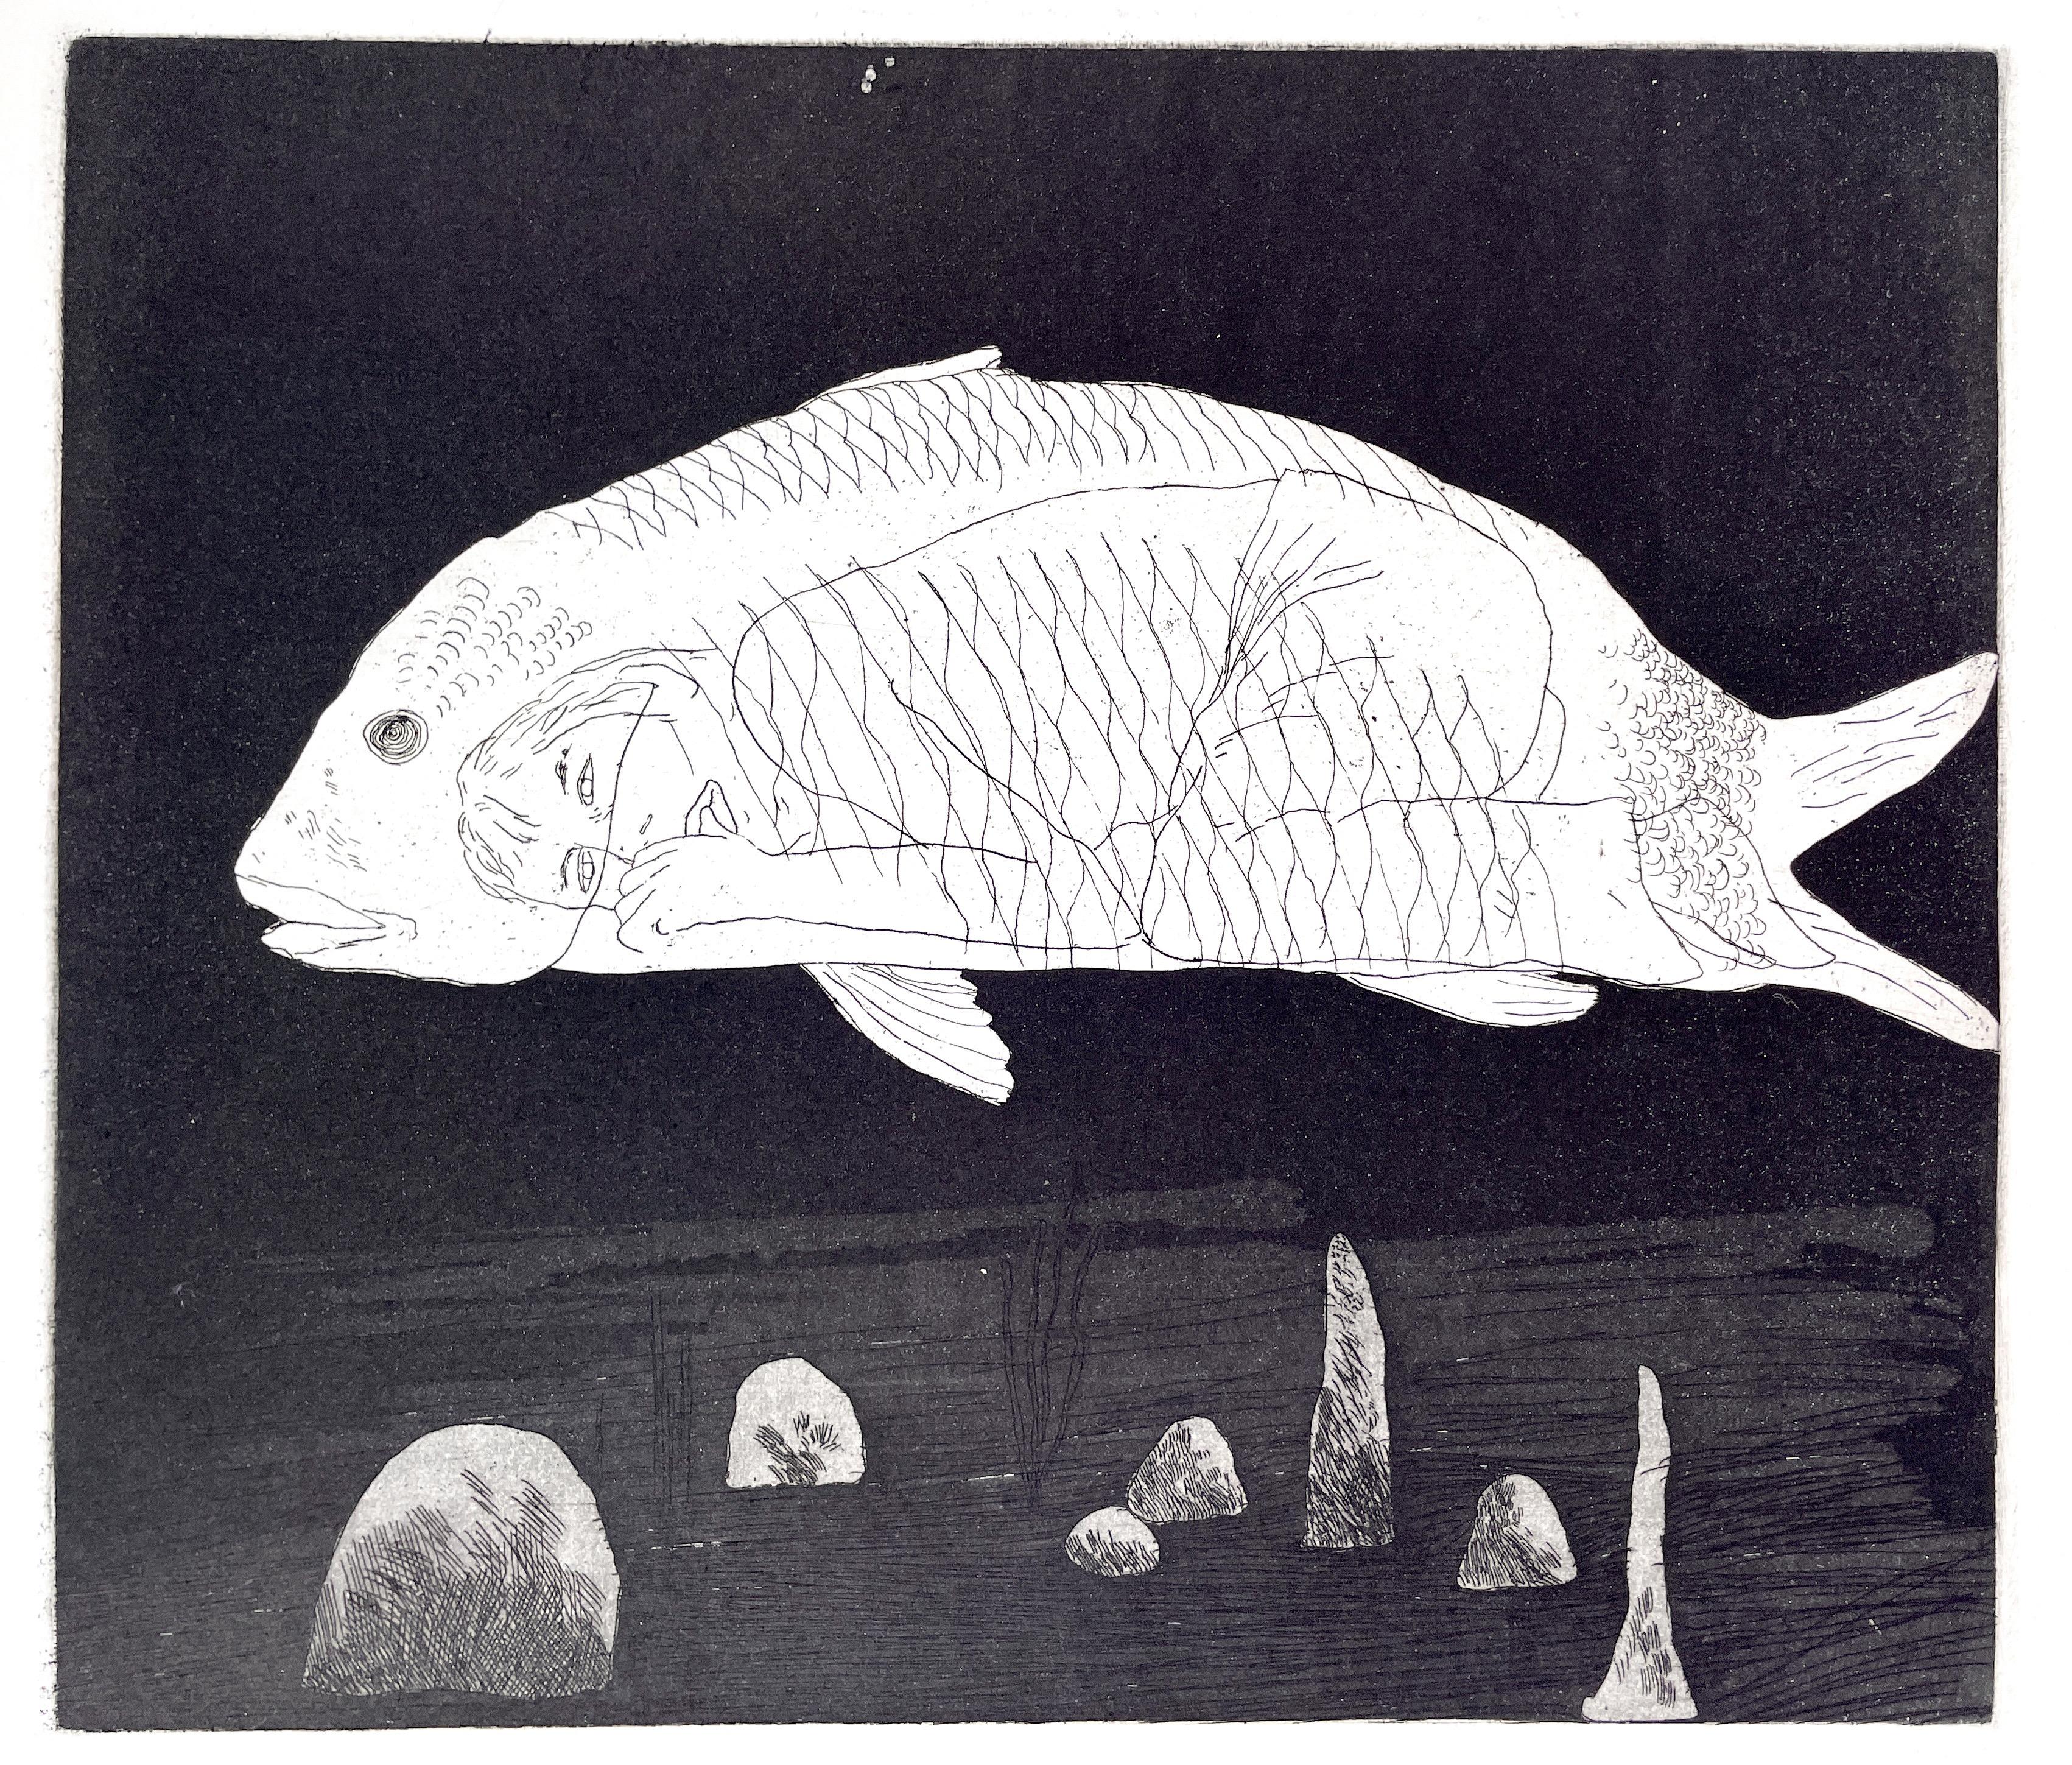 The Boy hidden in a Fish (Six Fairy Tales from the Brothers Grimm) - Print by David Hockney